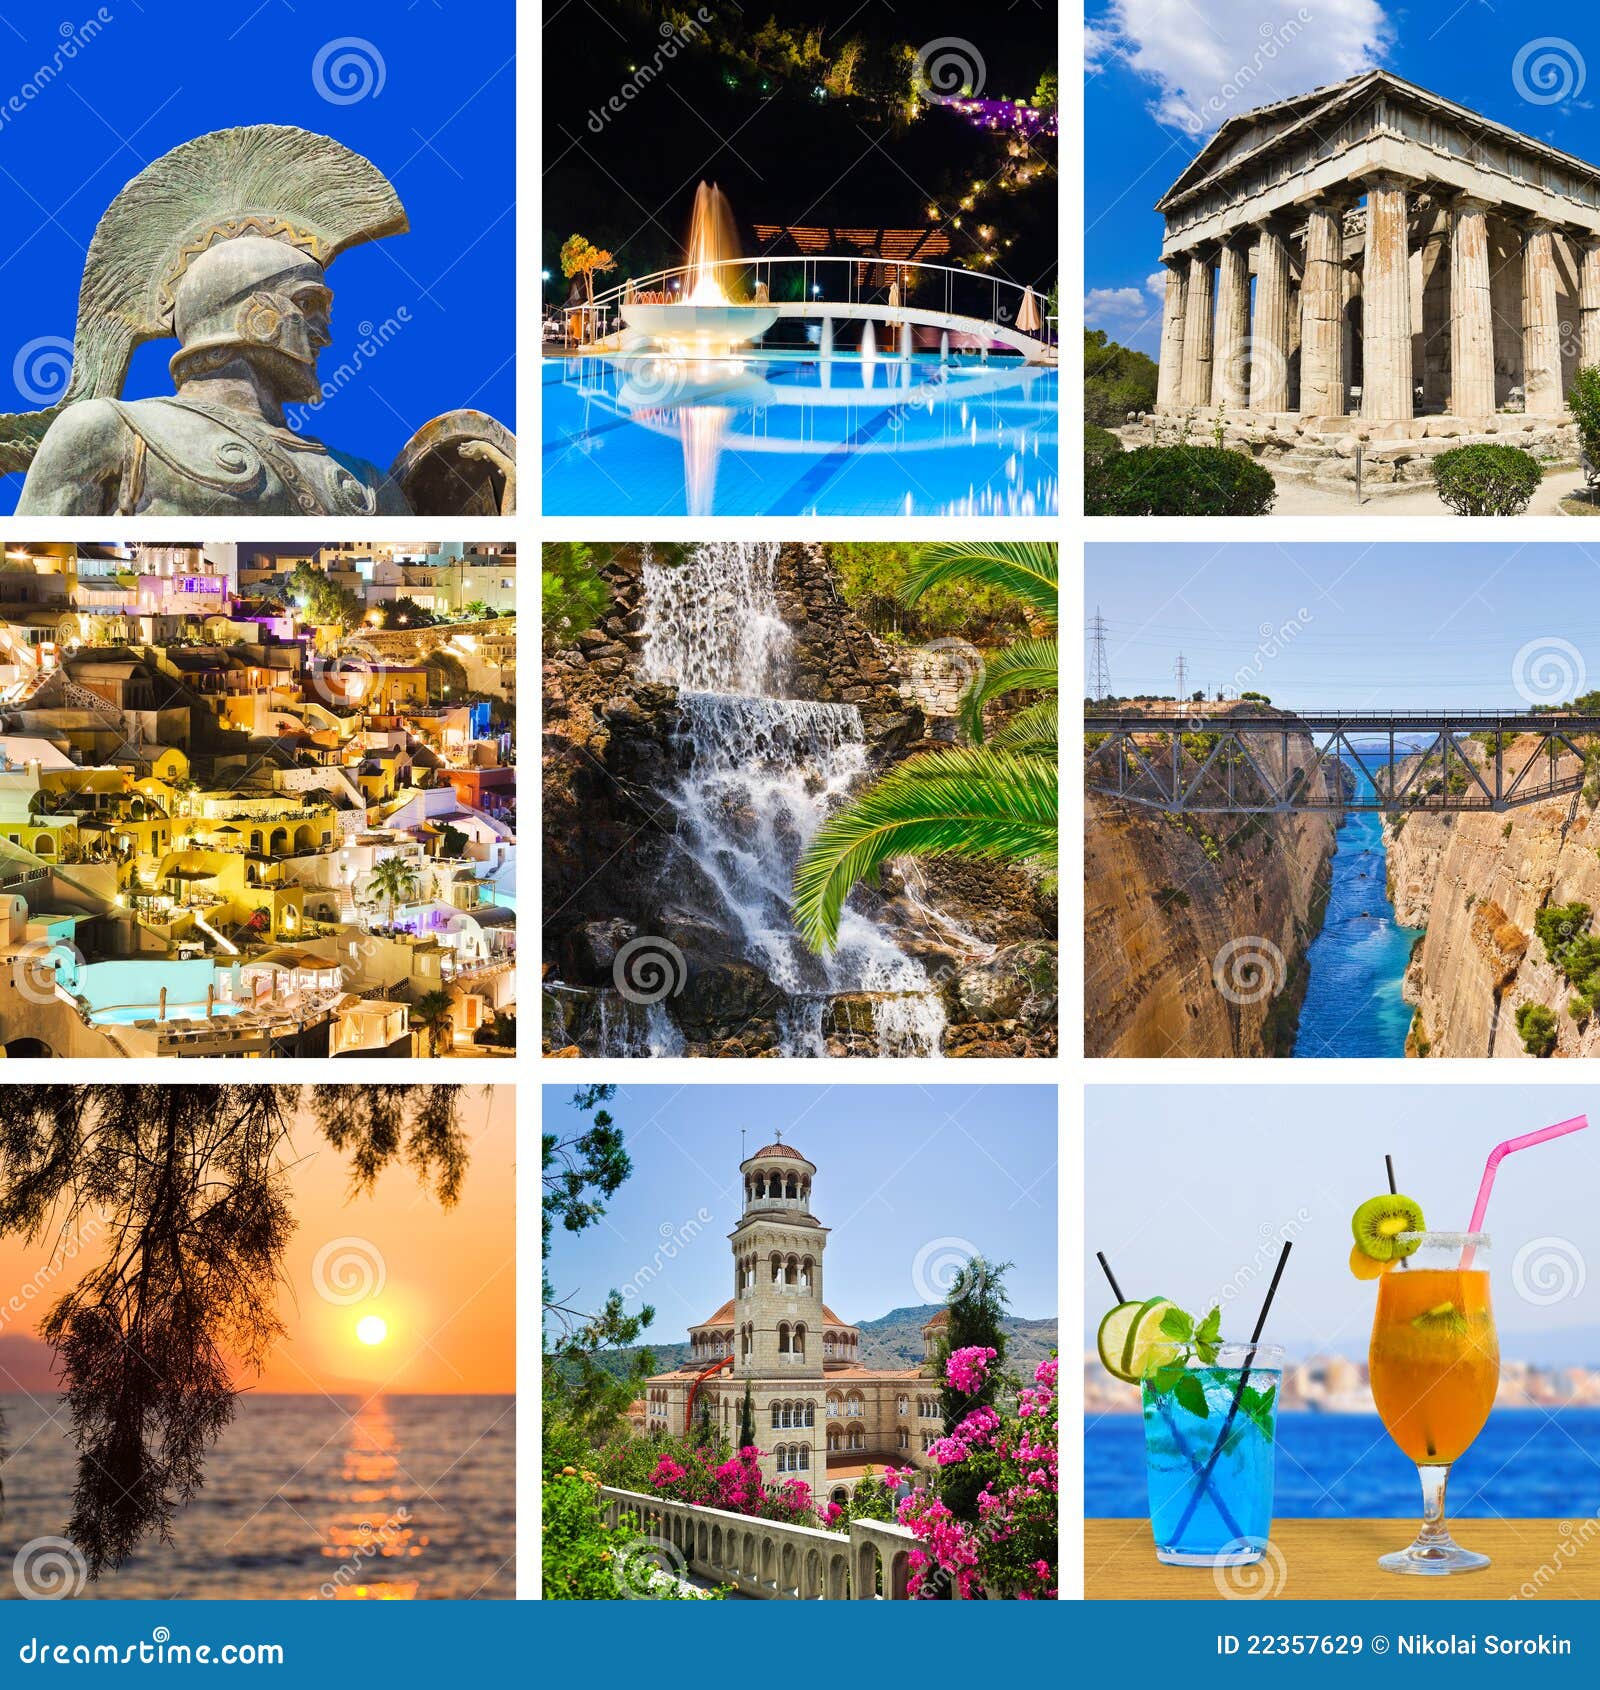 Collage Of Greece Travel Images Stock Image Image Of Collection